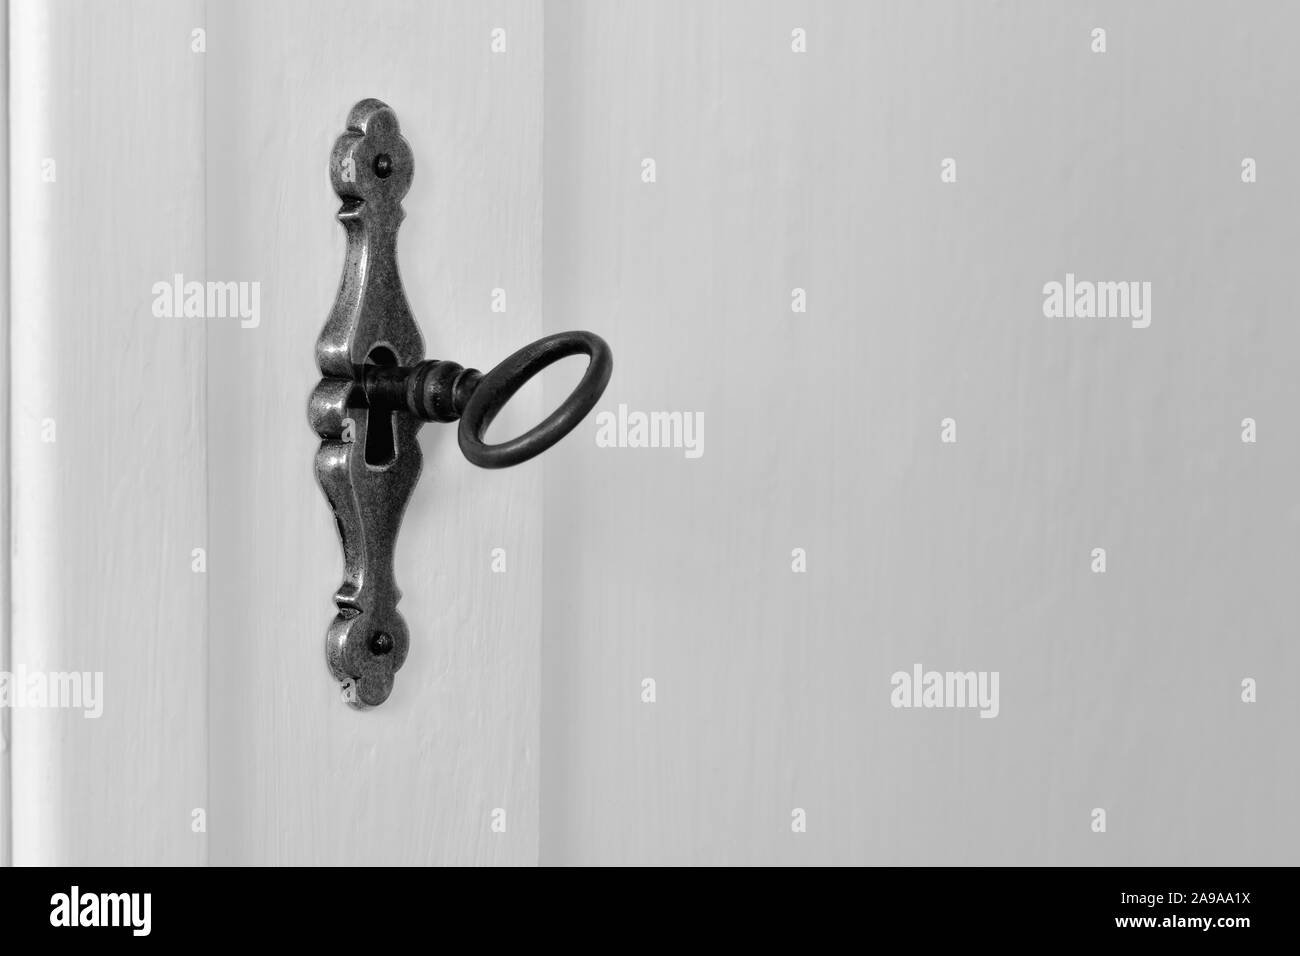 Old vintage key in the keyhole of an ornamental brass lock of a white wooden cupboard door. Monochrome, black and white, antique design, copy space. Stock Photo